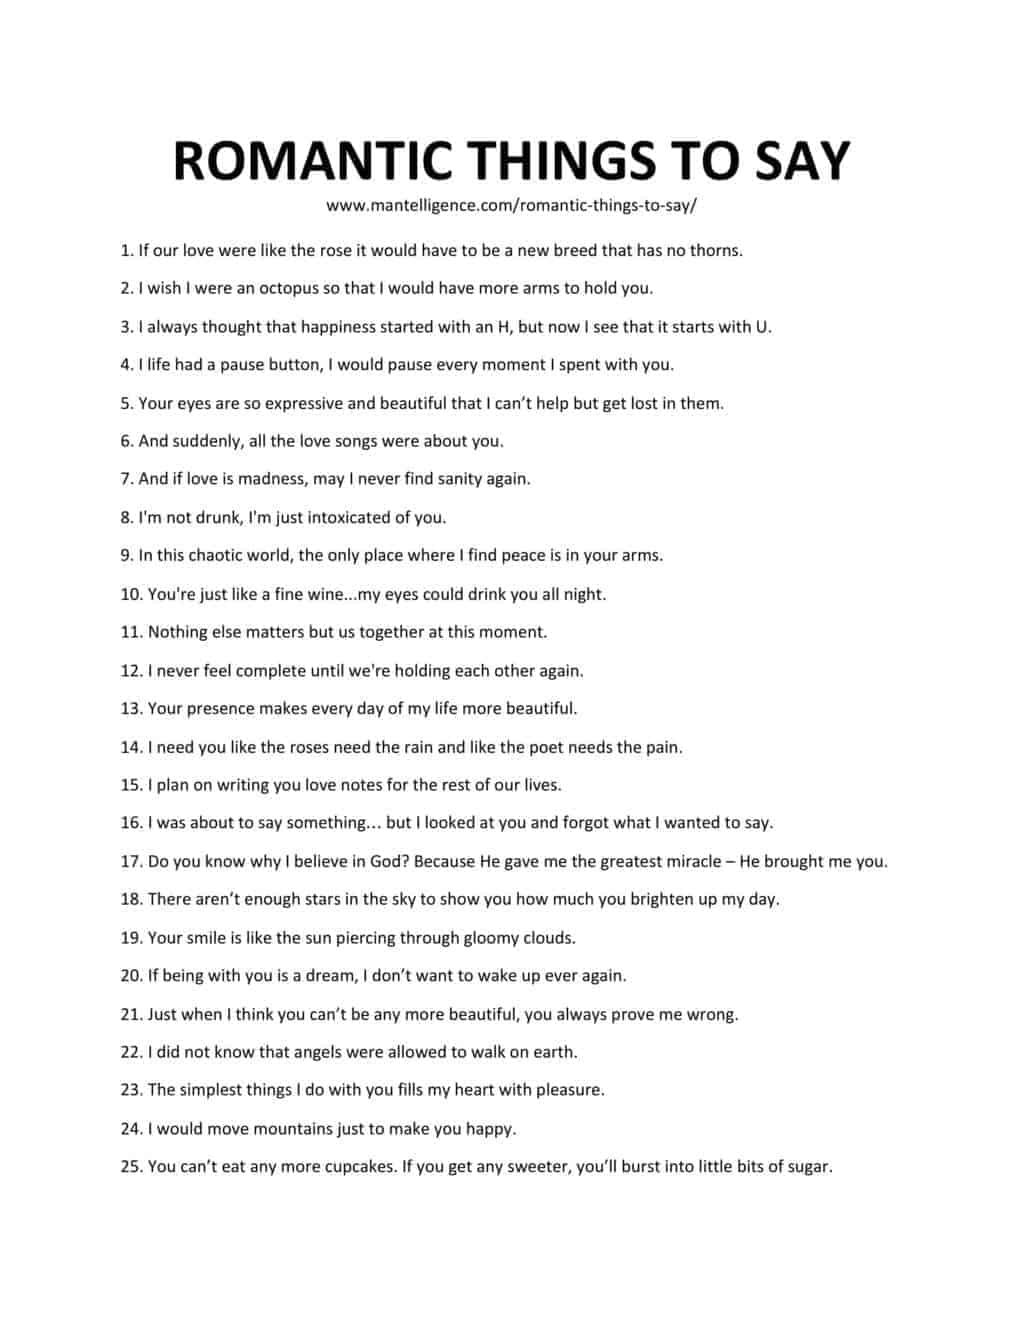 Romantic things to tell her